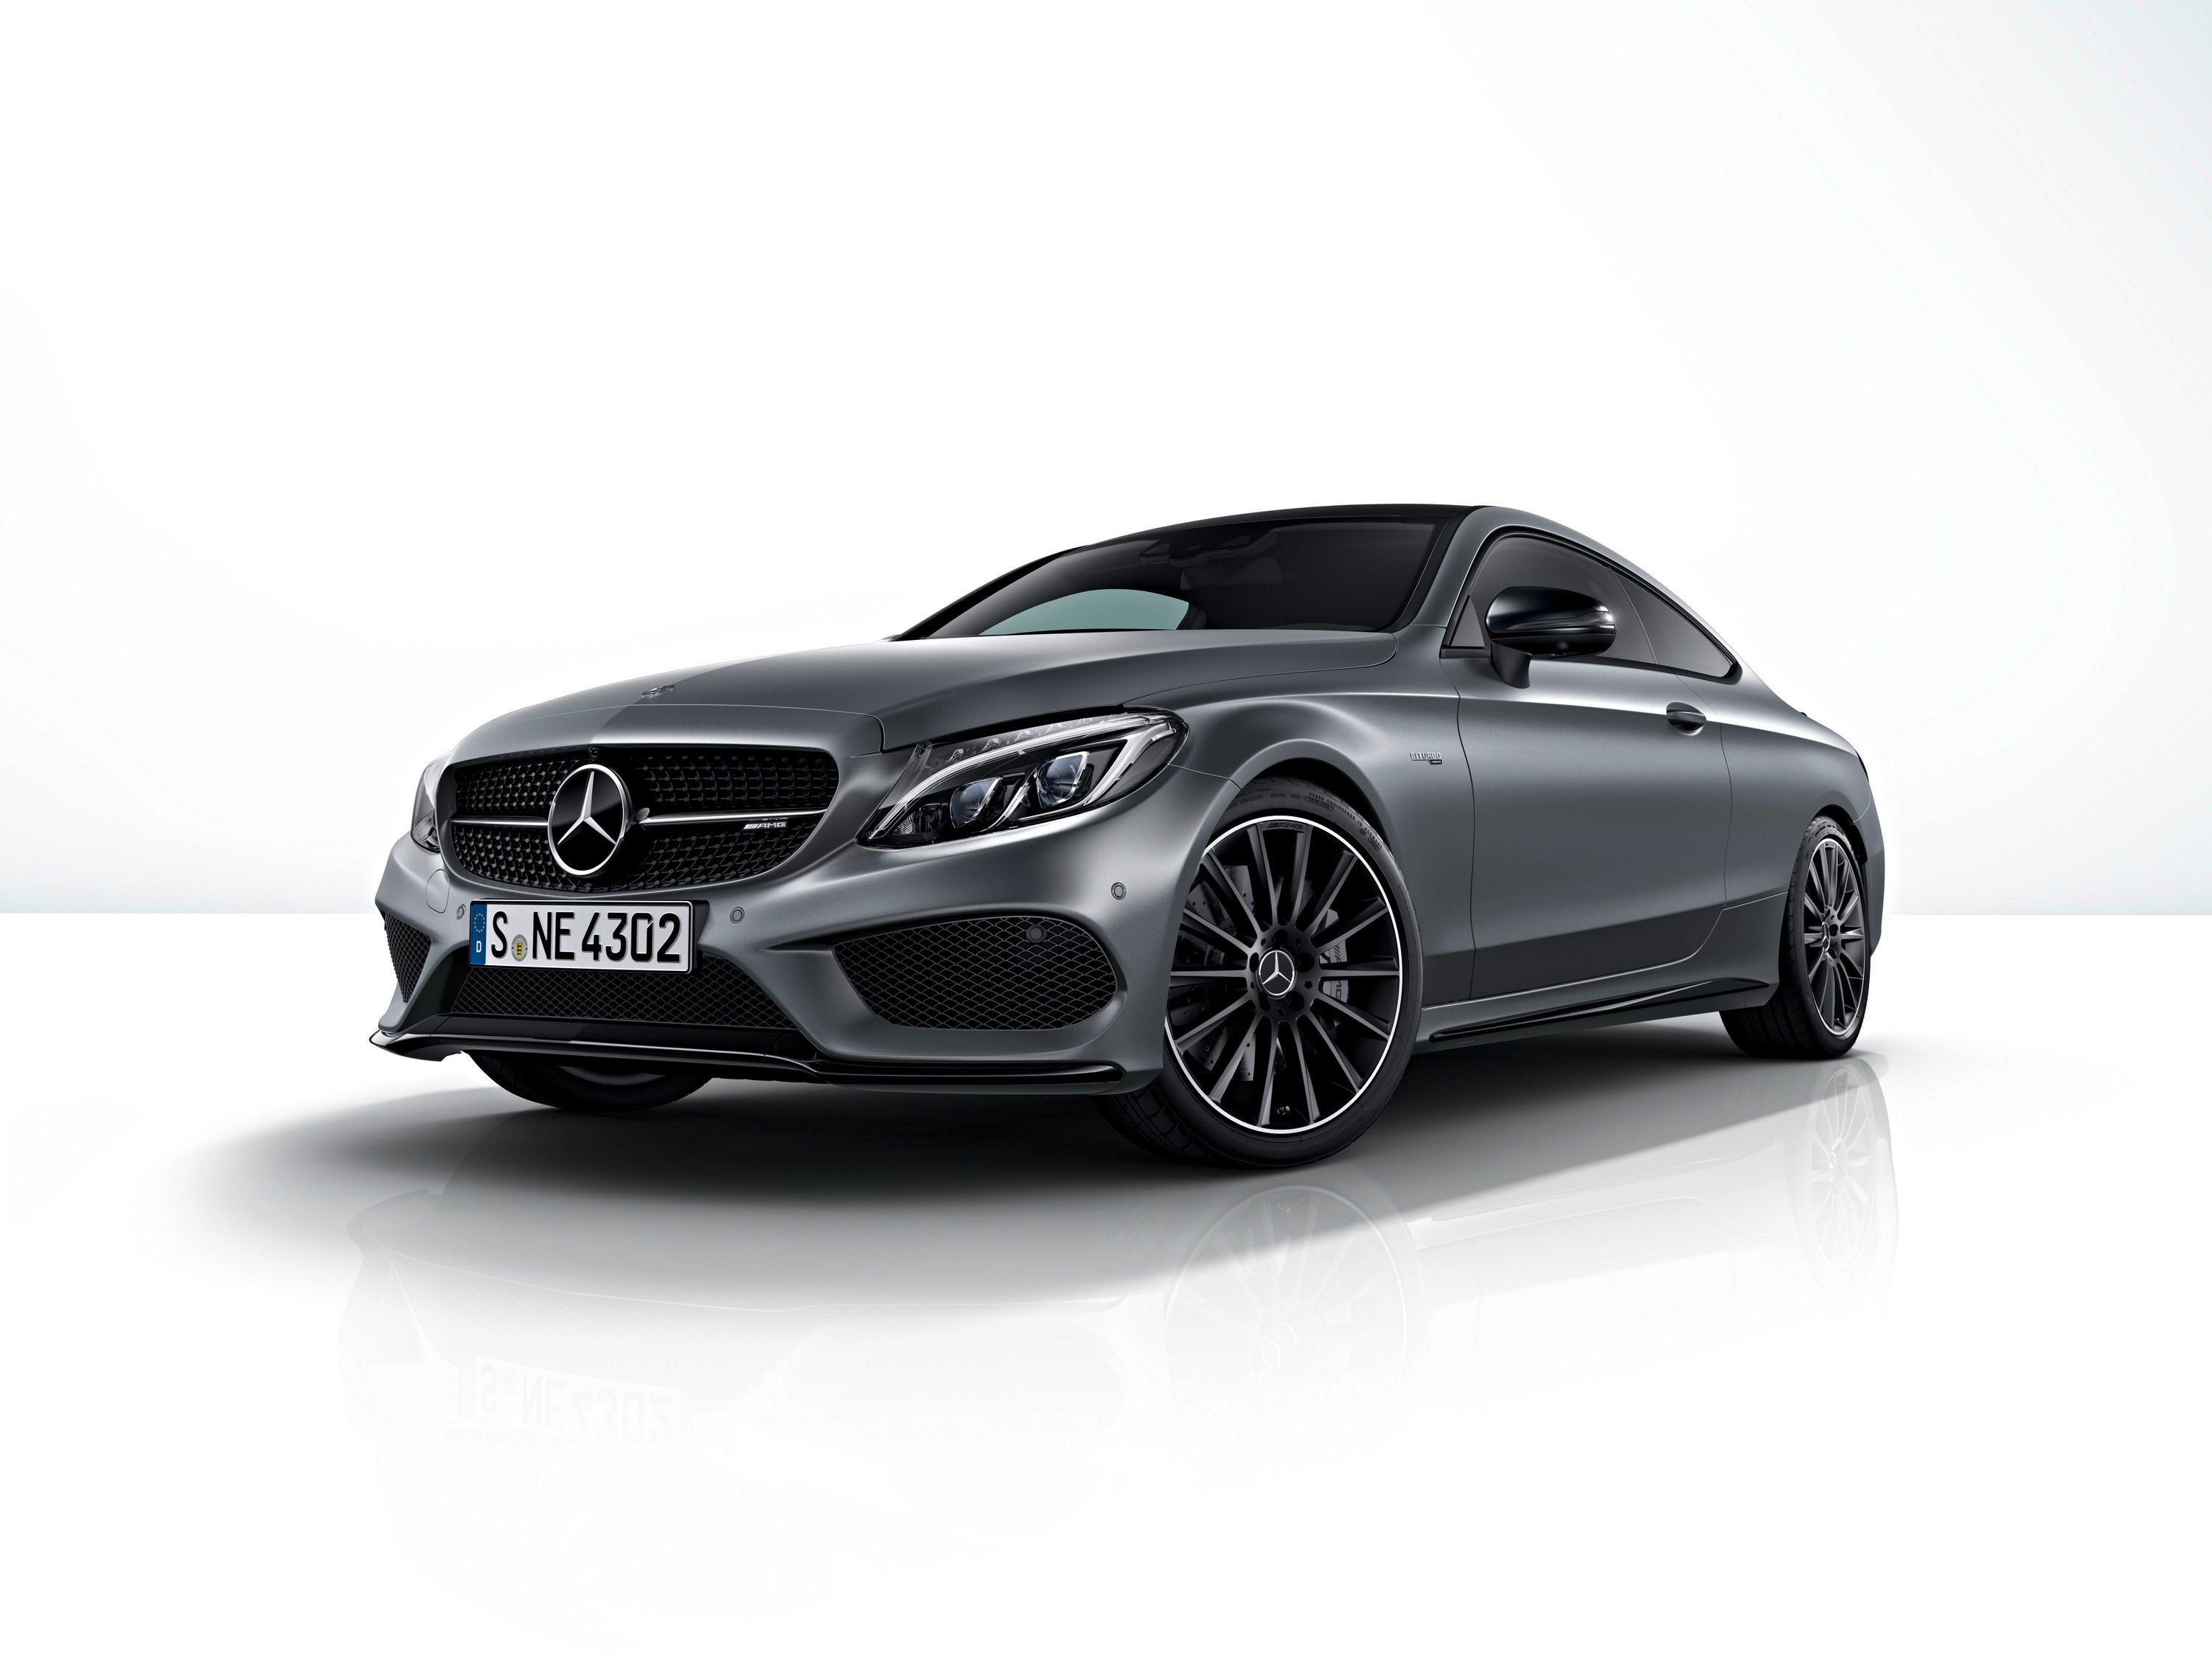 2017 Mercedes-AMG C 43 4MATIC Coupé and Cabriolet Night Edition